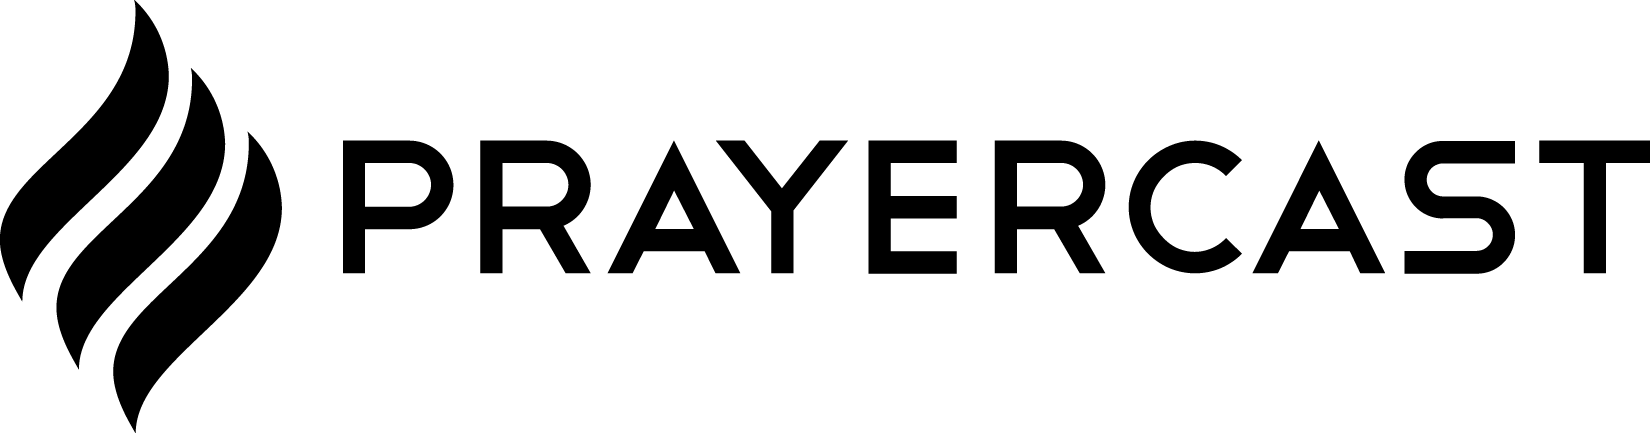 Leaders and Influencers (Prayercast)